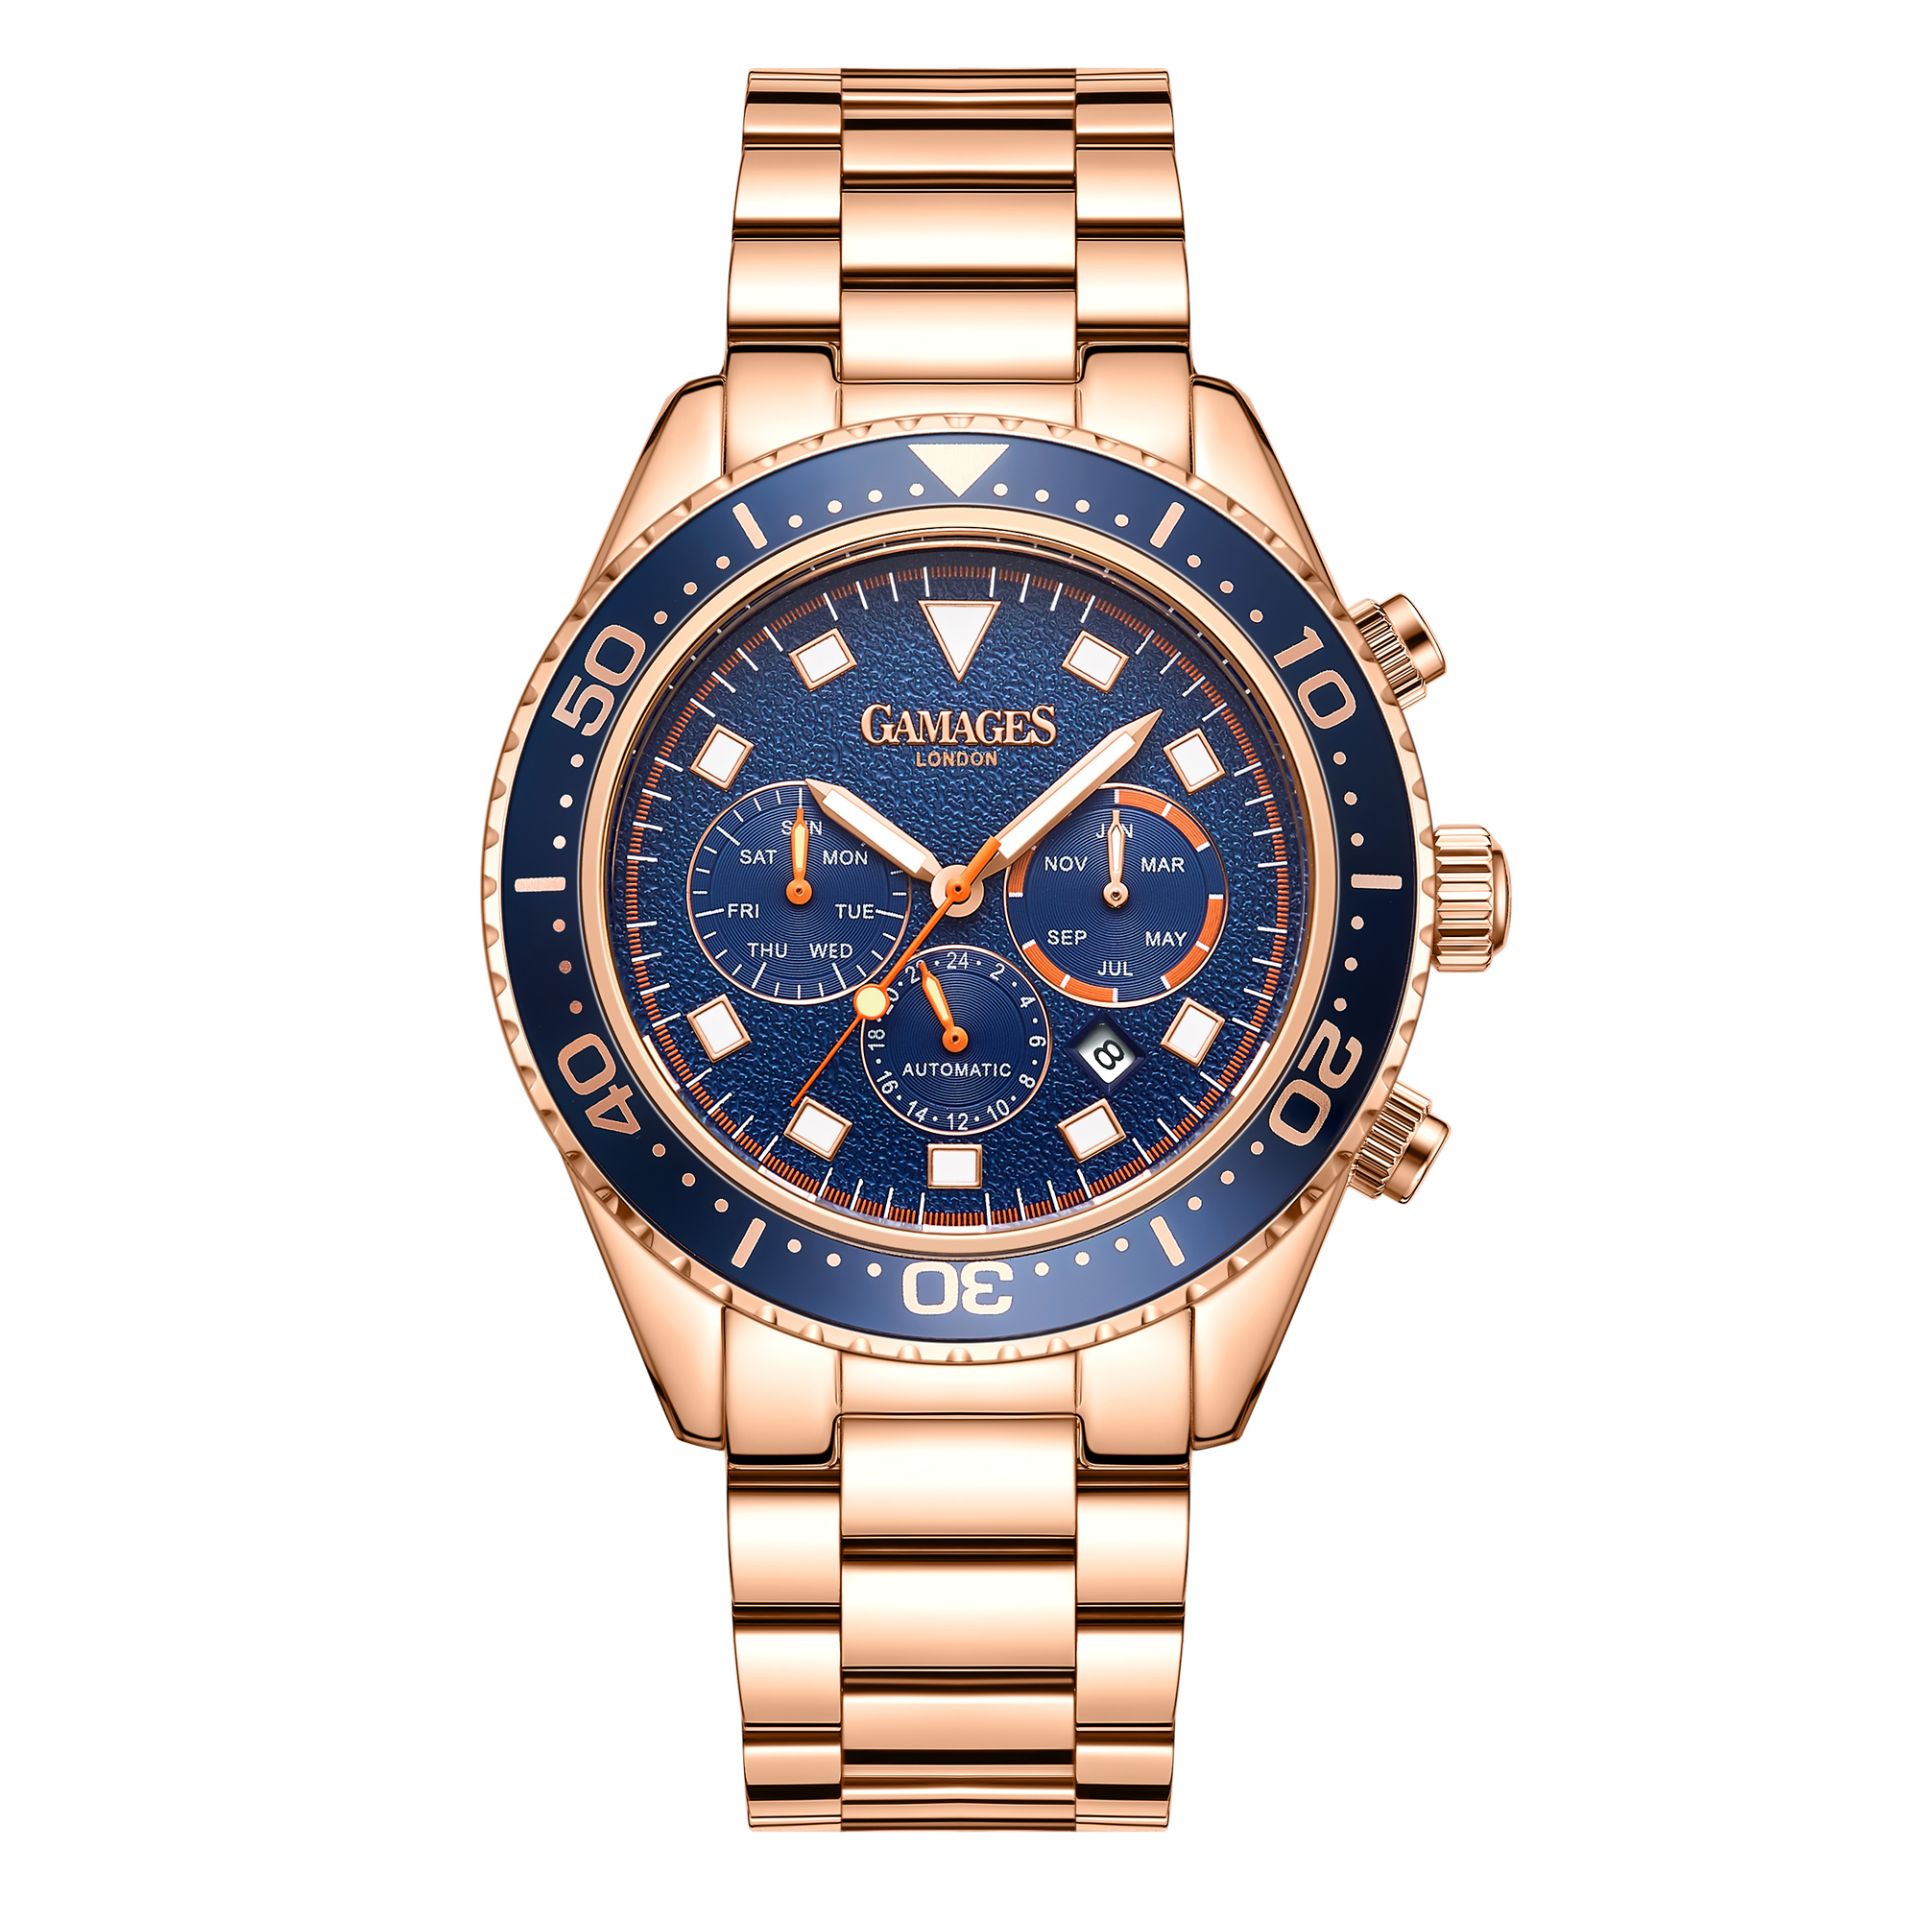 Limited Edition Hand Assembled GAMAGES Allure Automatic Rose – 5 Year Warranty & Free Delivery